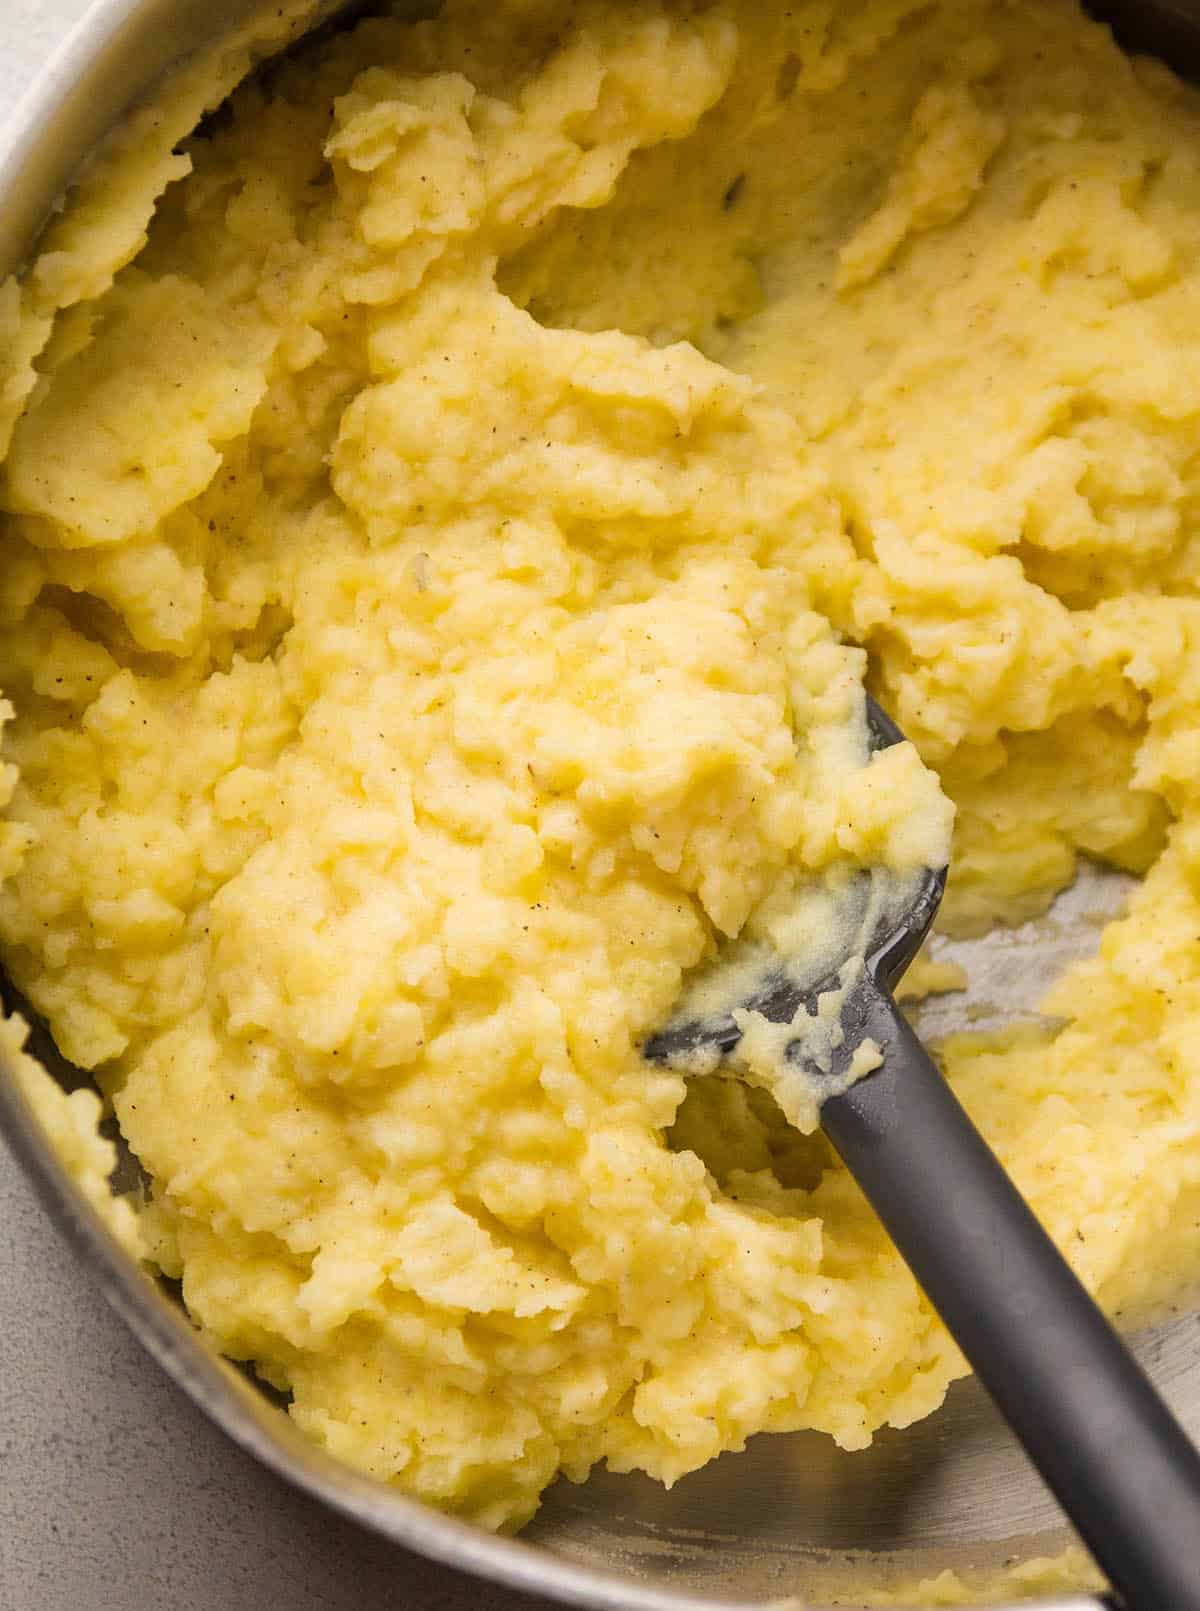 Mashed potatoes in a large pot.